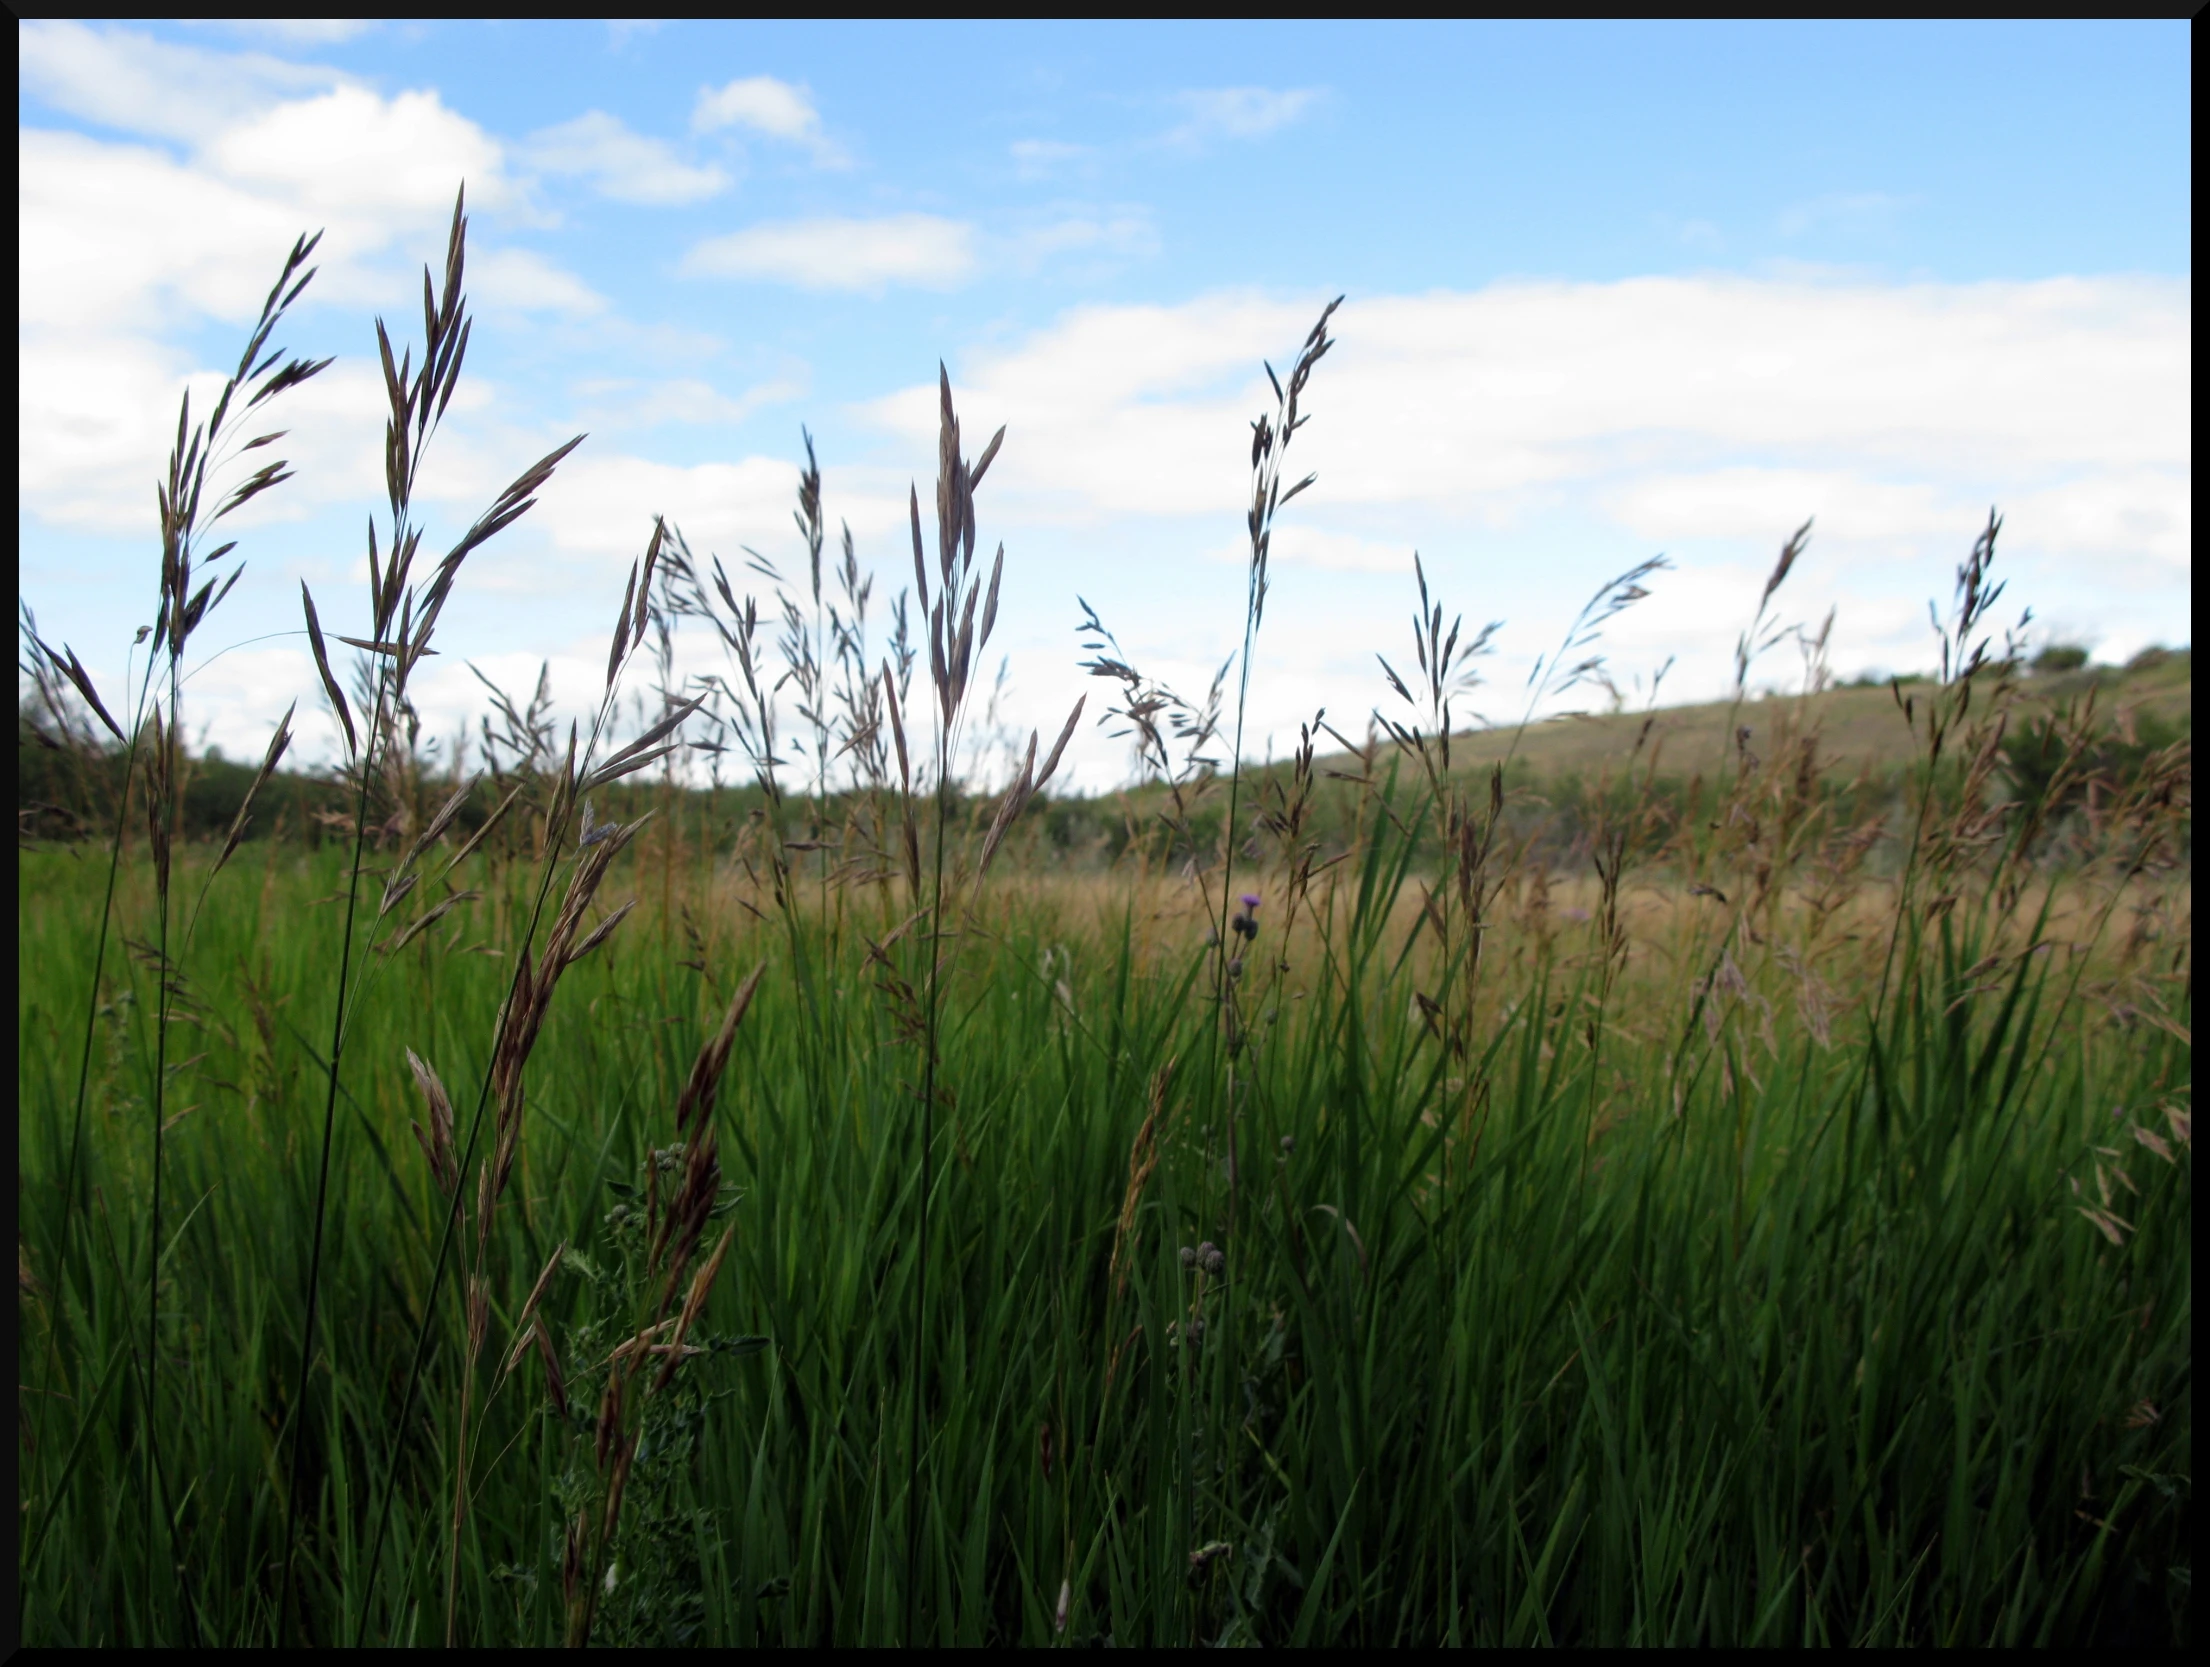 tall grasses are in the background, with blue skies in the background